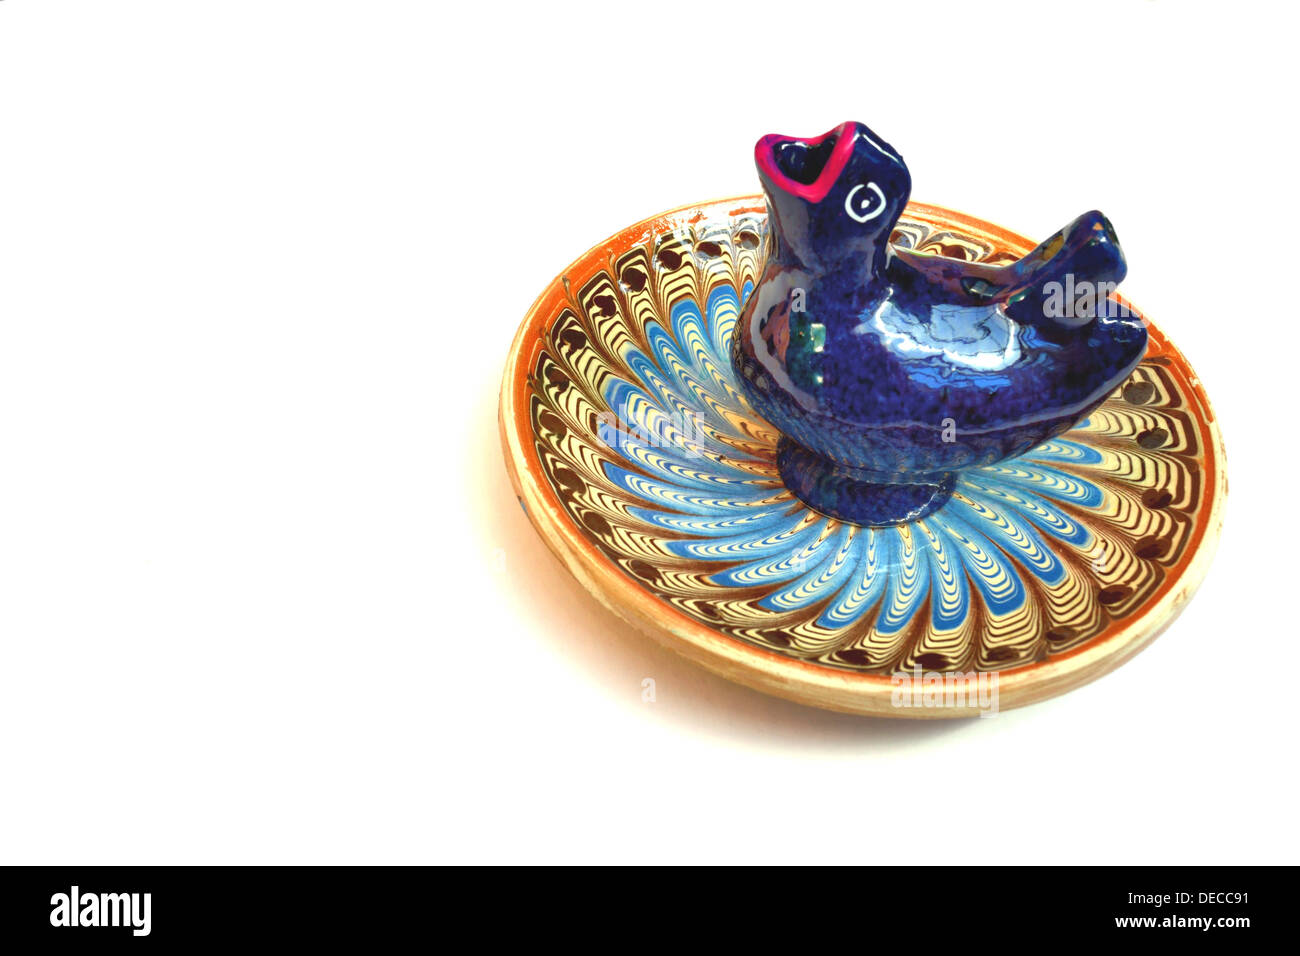 Isolated Blue Chicken Whistle on a Cobalt Ceramic Plate. Stock Photo